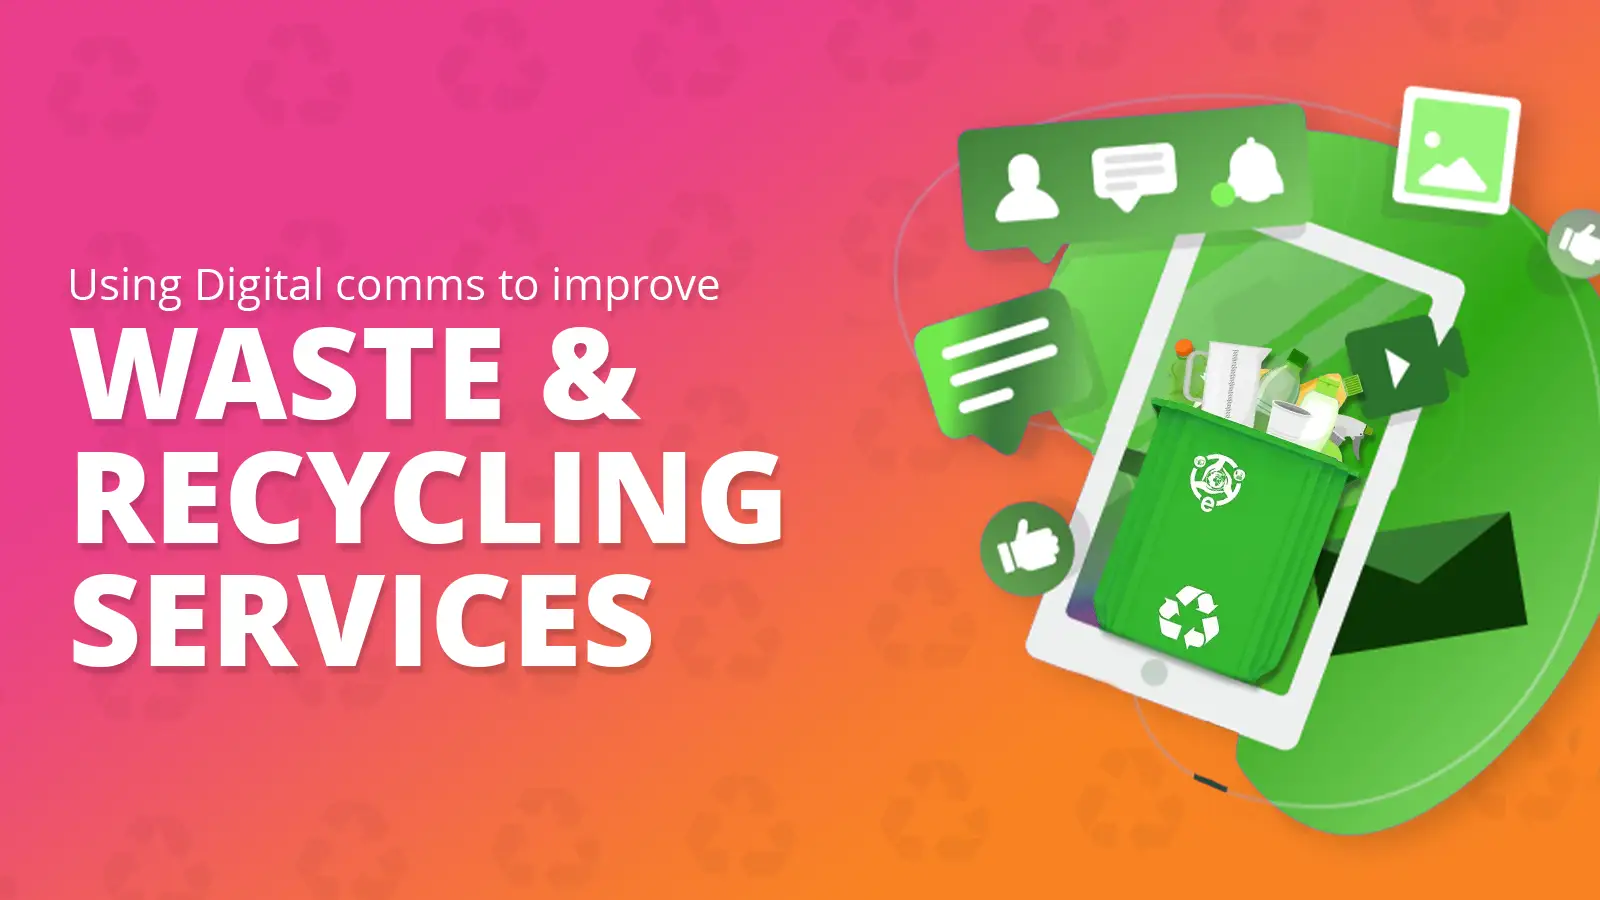 Using digital comms to improve waste and recycling services